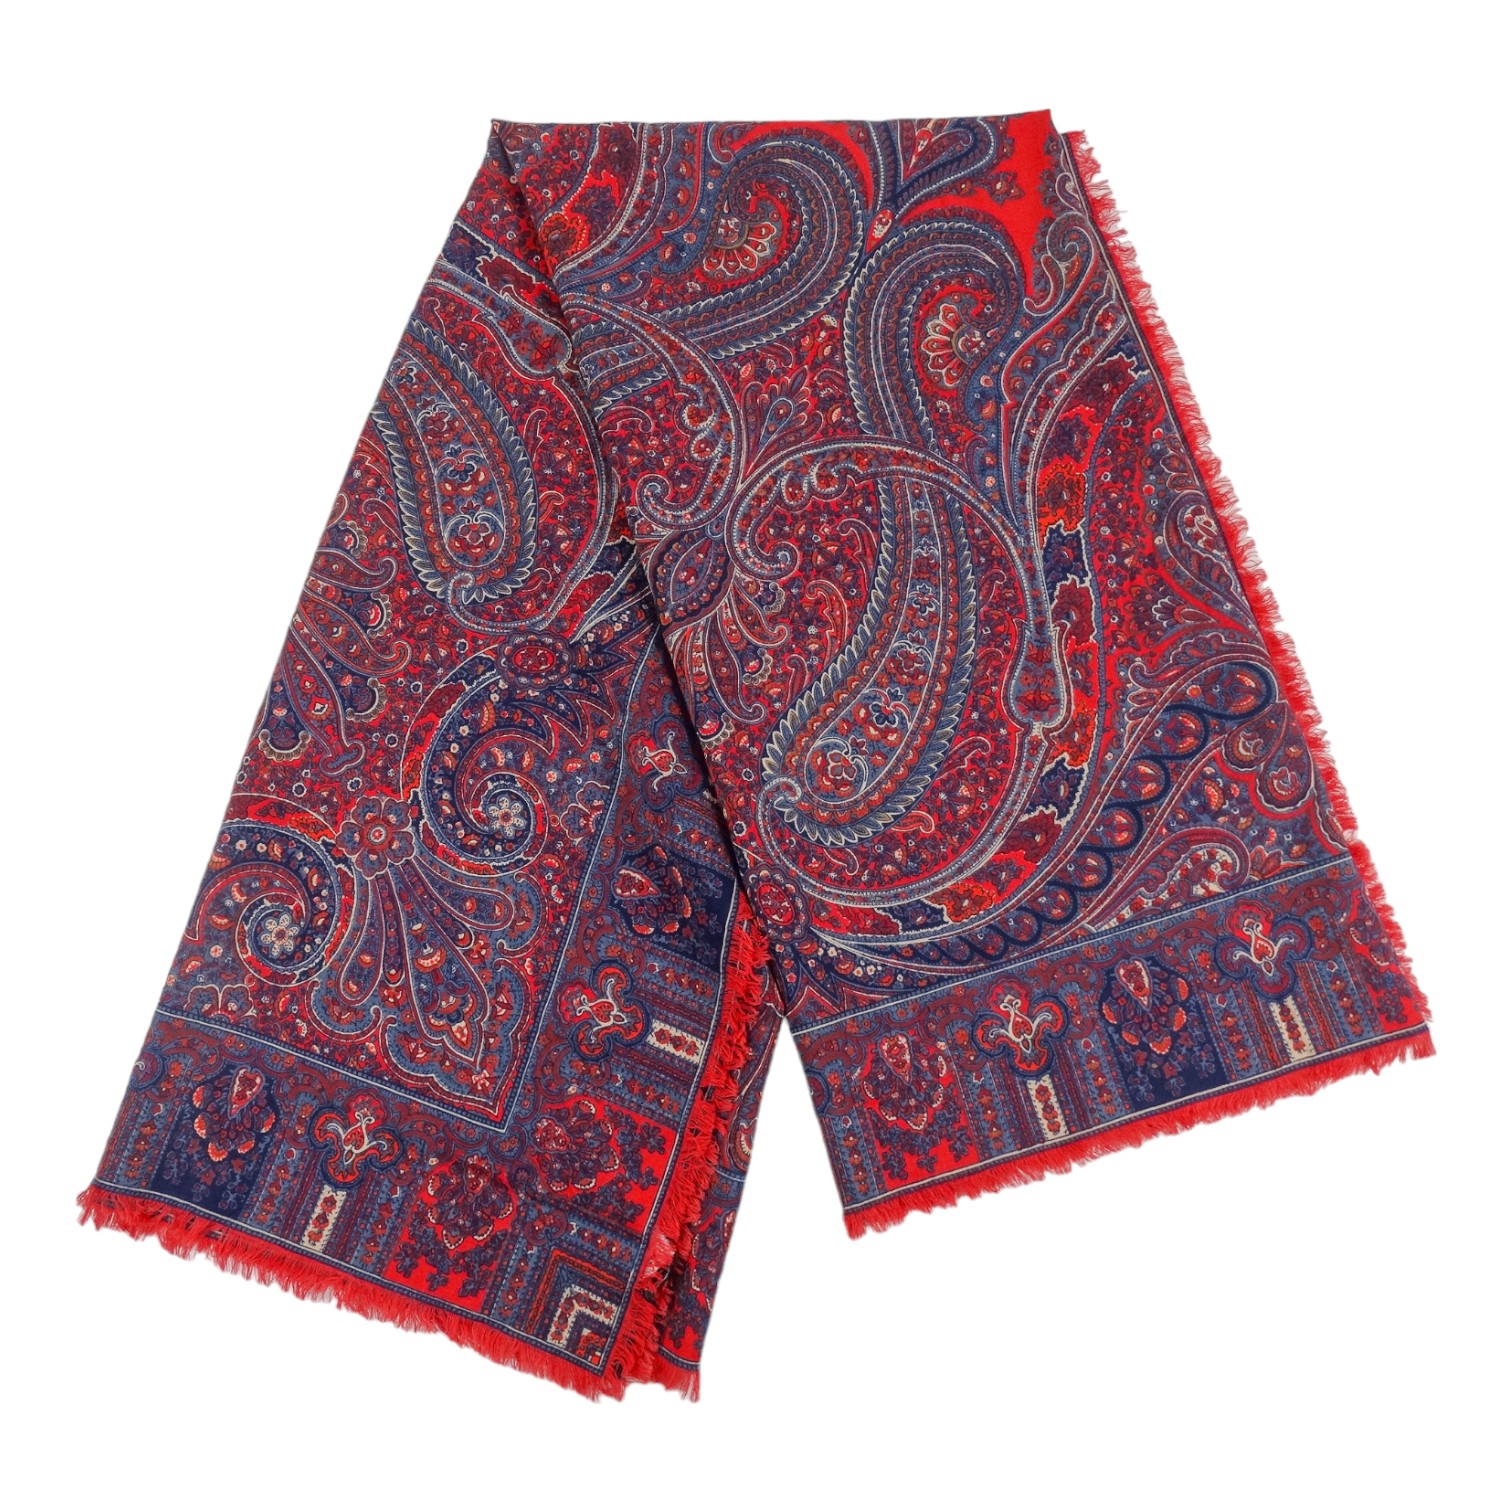 A wool shawl by Liberty - with a red and blue paisley pattern, 130 x 130cm. - Image 2 of 4